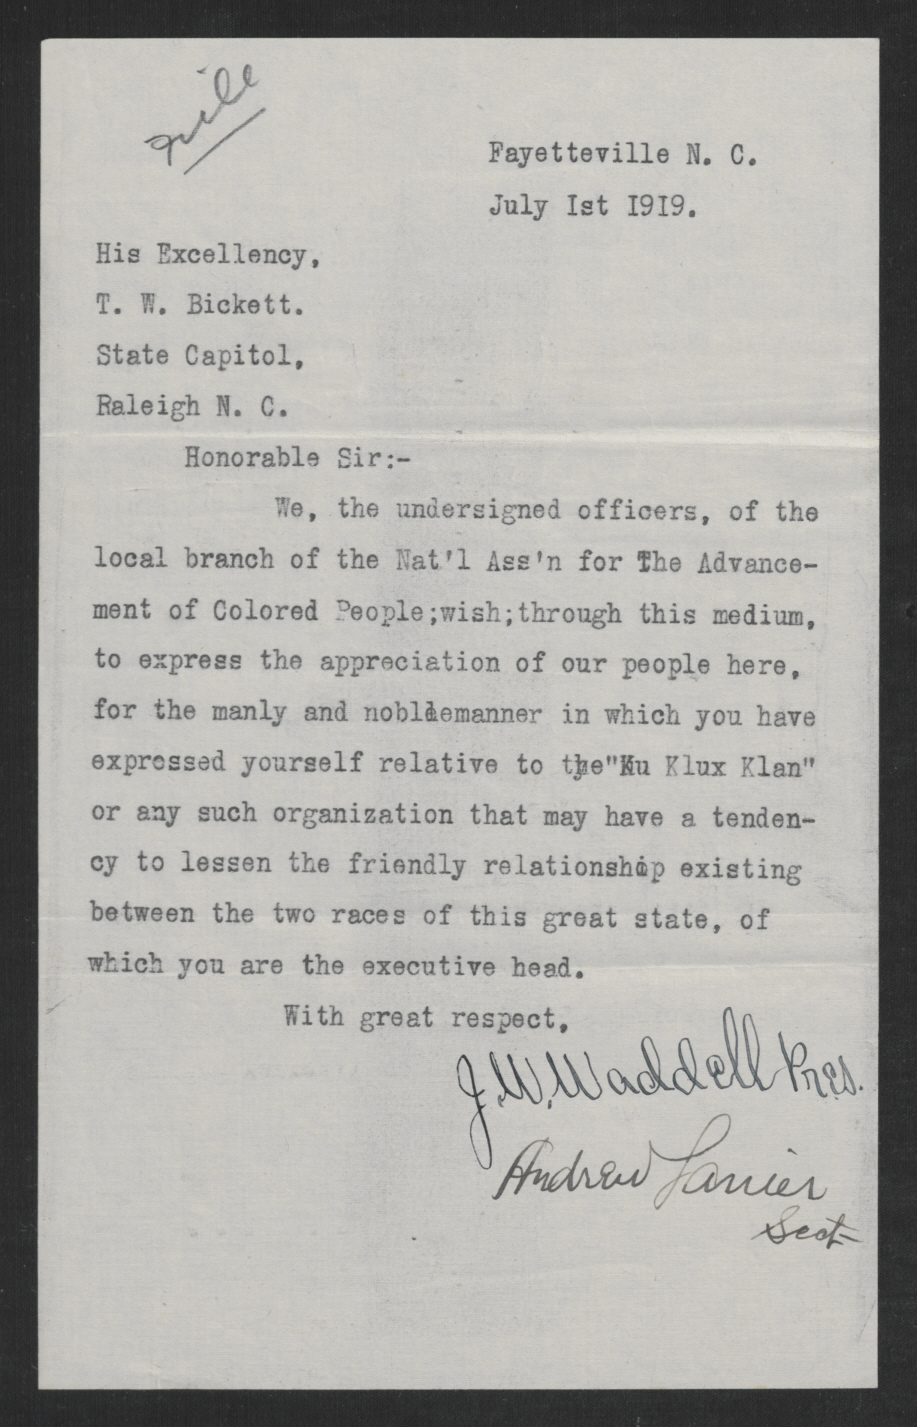 Letter from J. W. Waddell and Andrew Lanier to Thomas W. Bickett, July 1, 1919